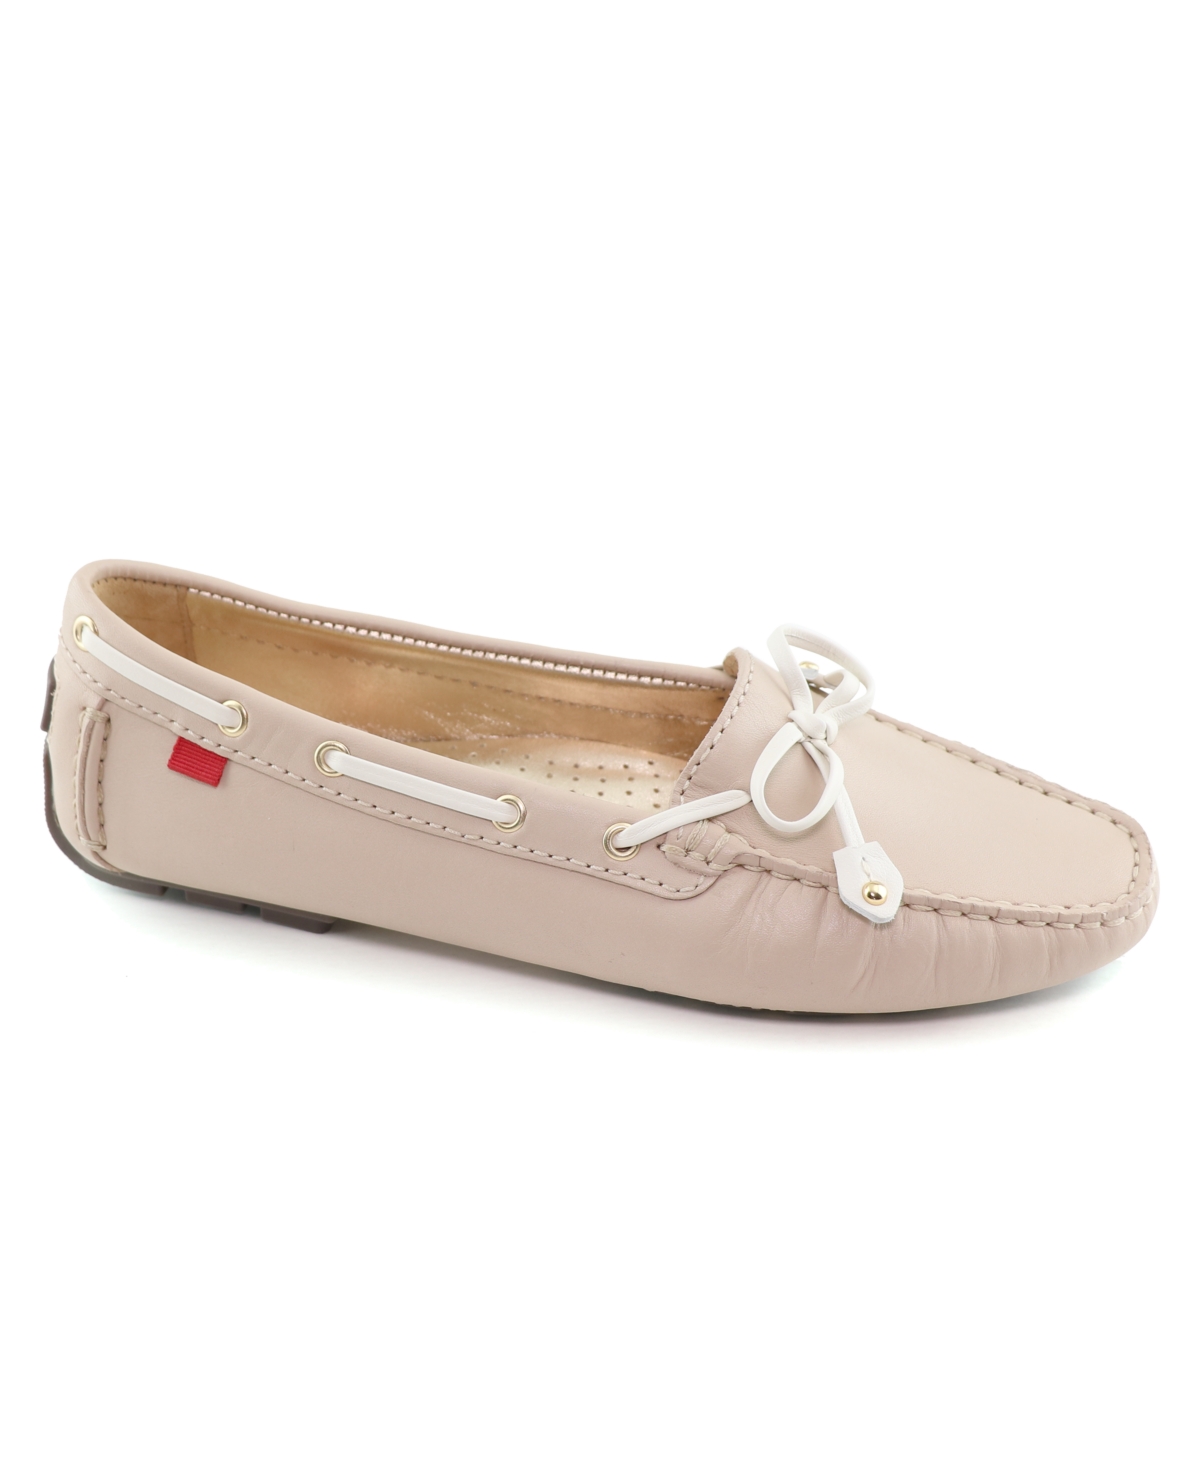 Cypress Hill Leather Flats - Nude Napa